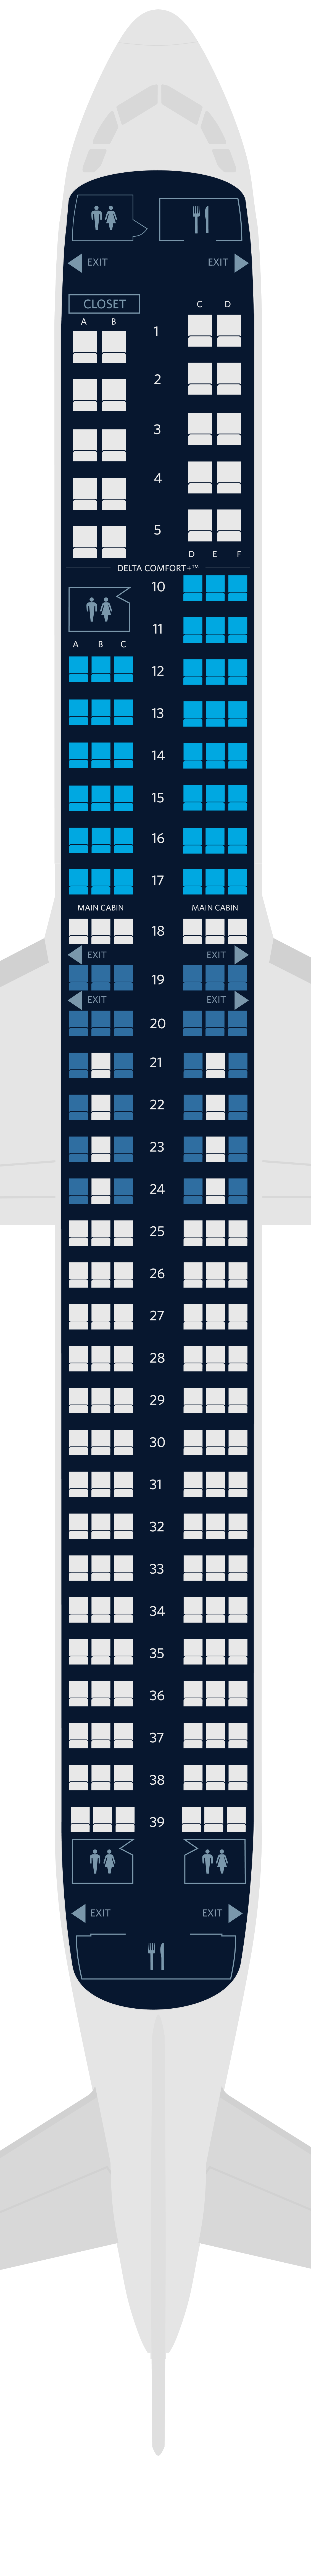 Airbus A321neo seat map